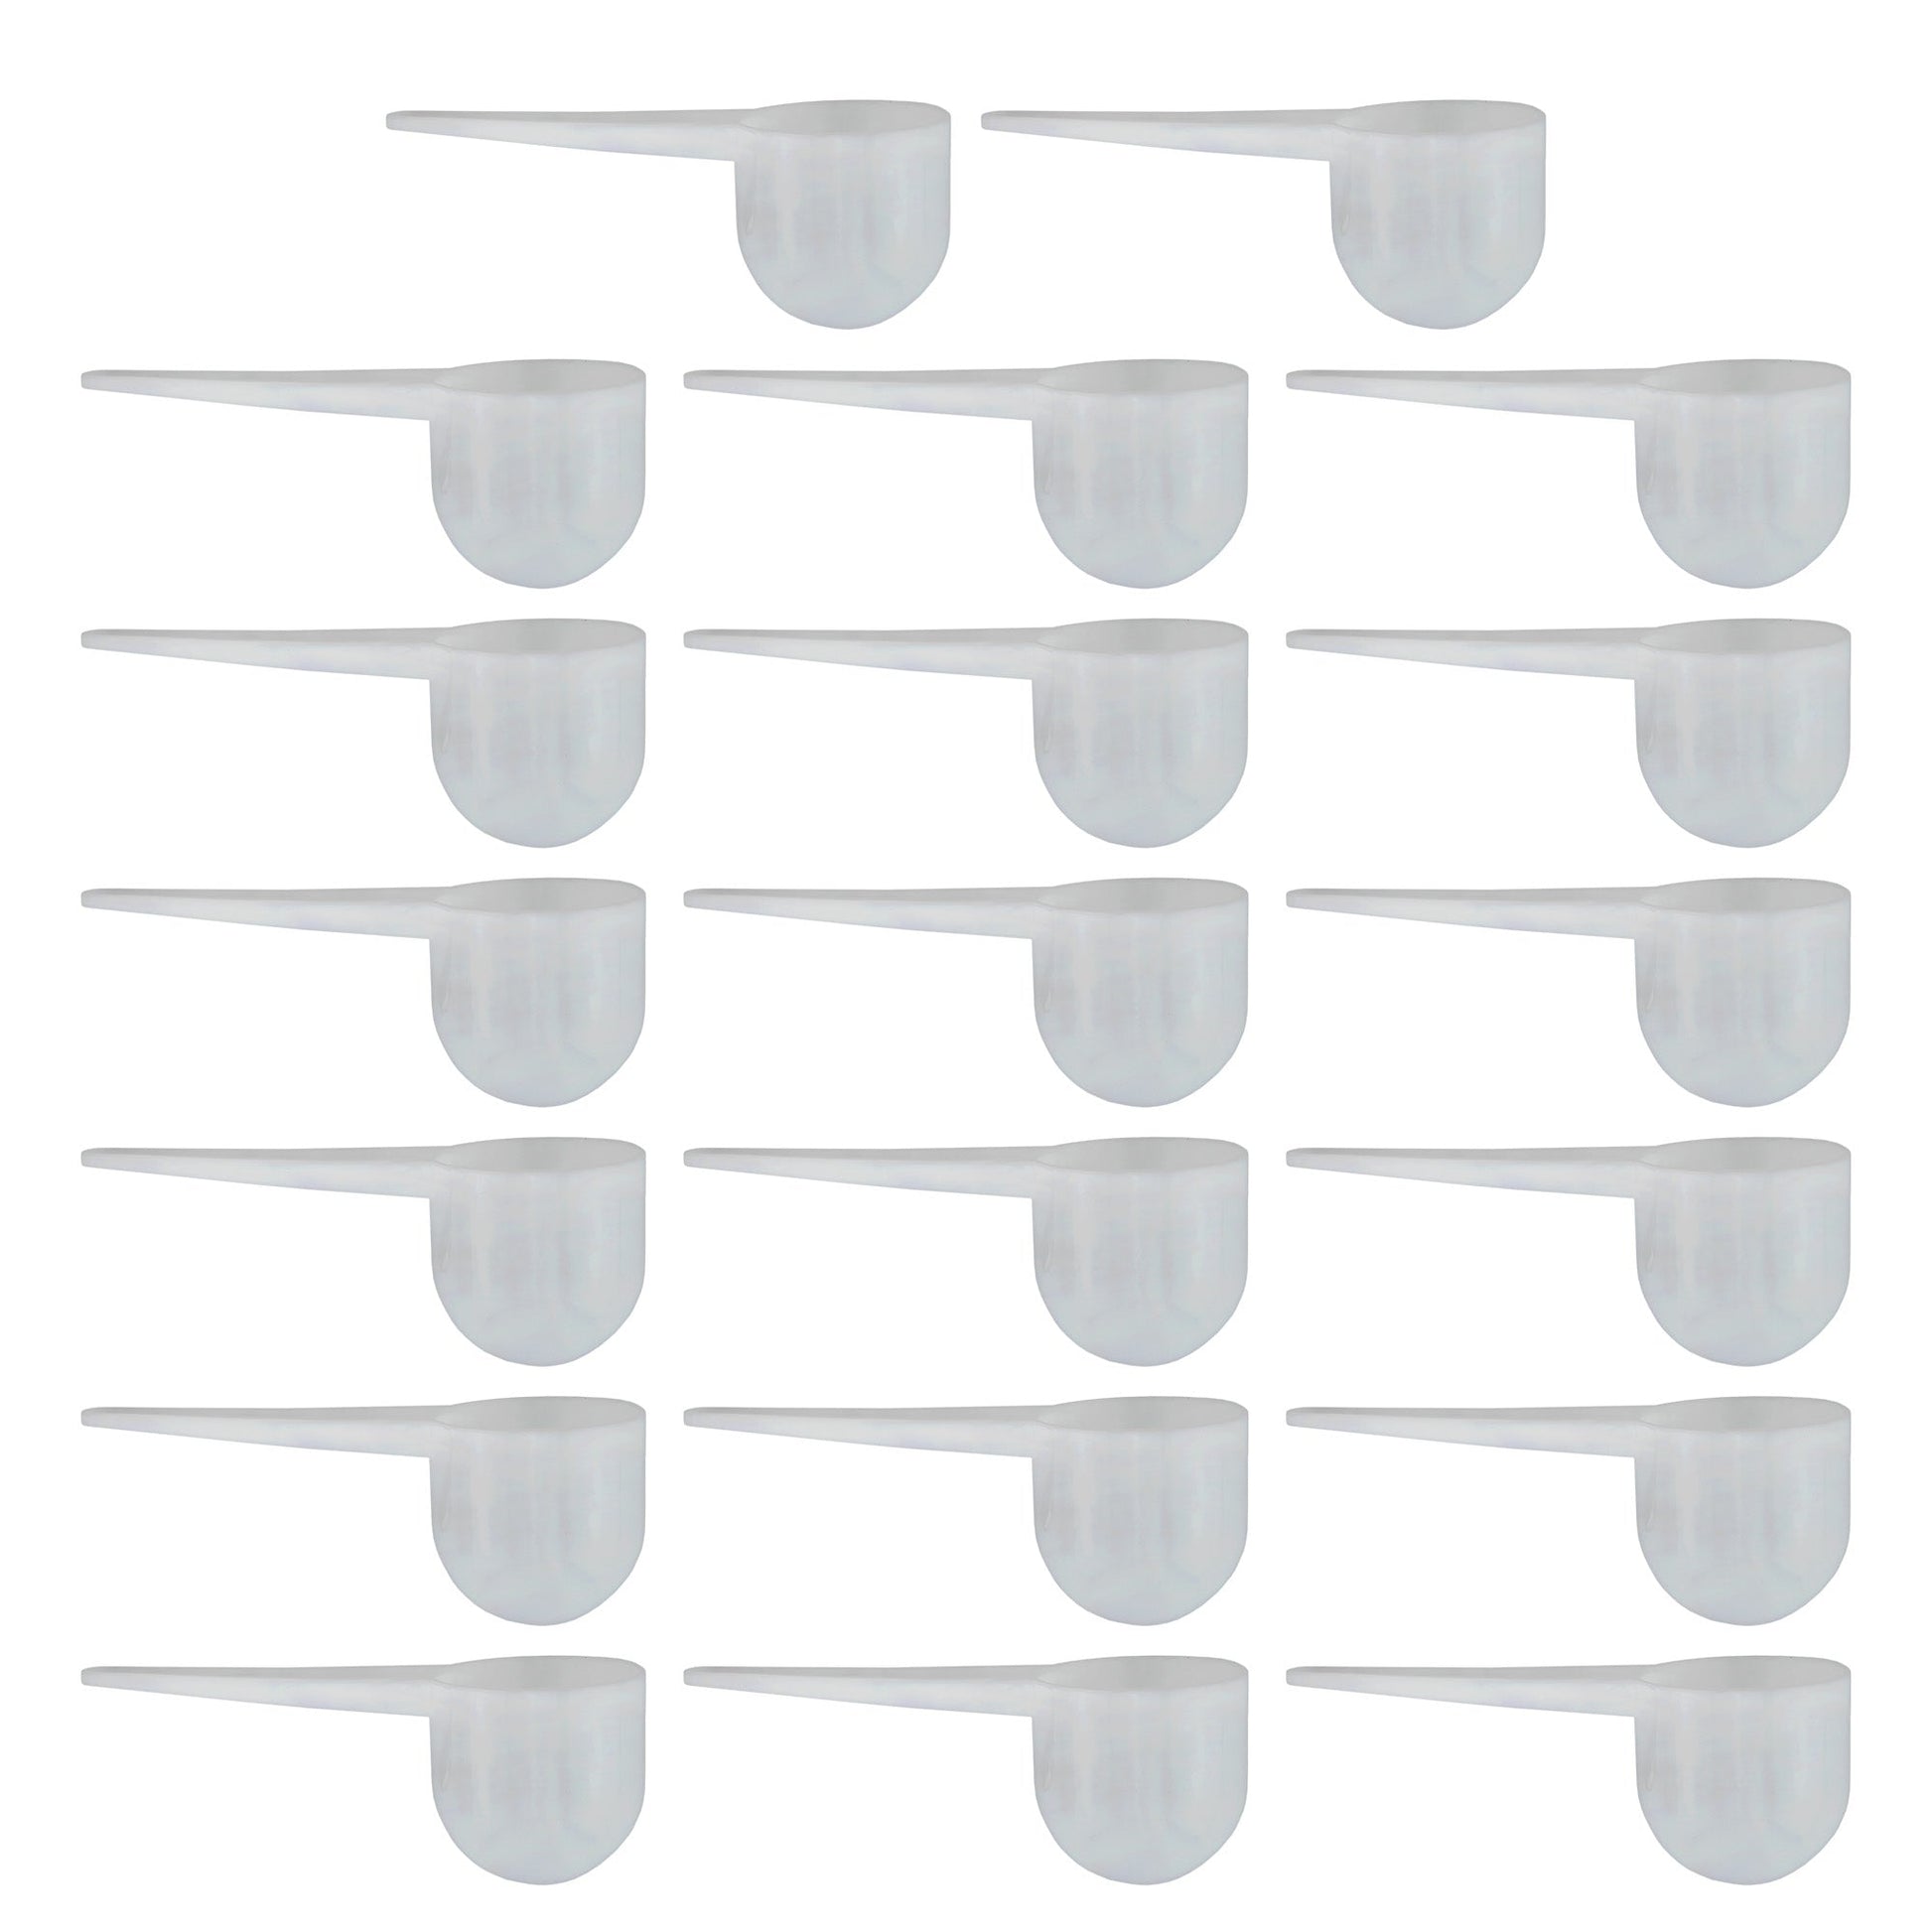 Coffee Scoops/2 Tablespoon Plastic Measuring Spoons (Case of 1260) - SH_2026_CASE